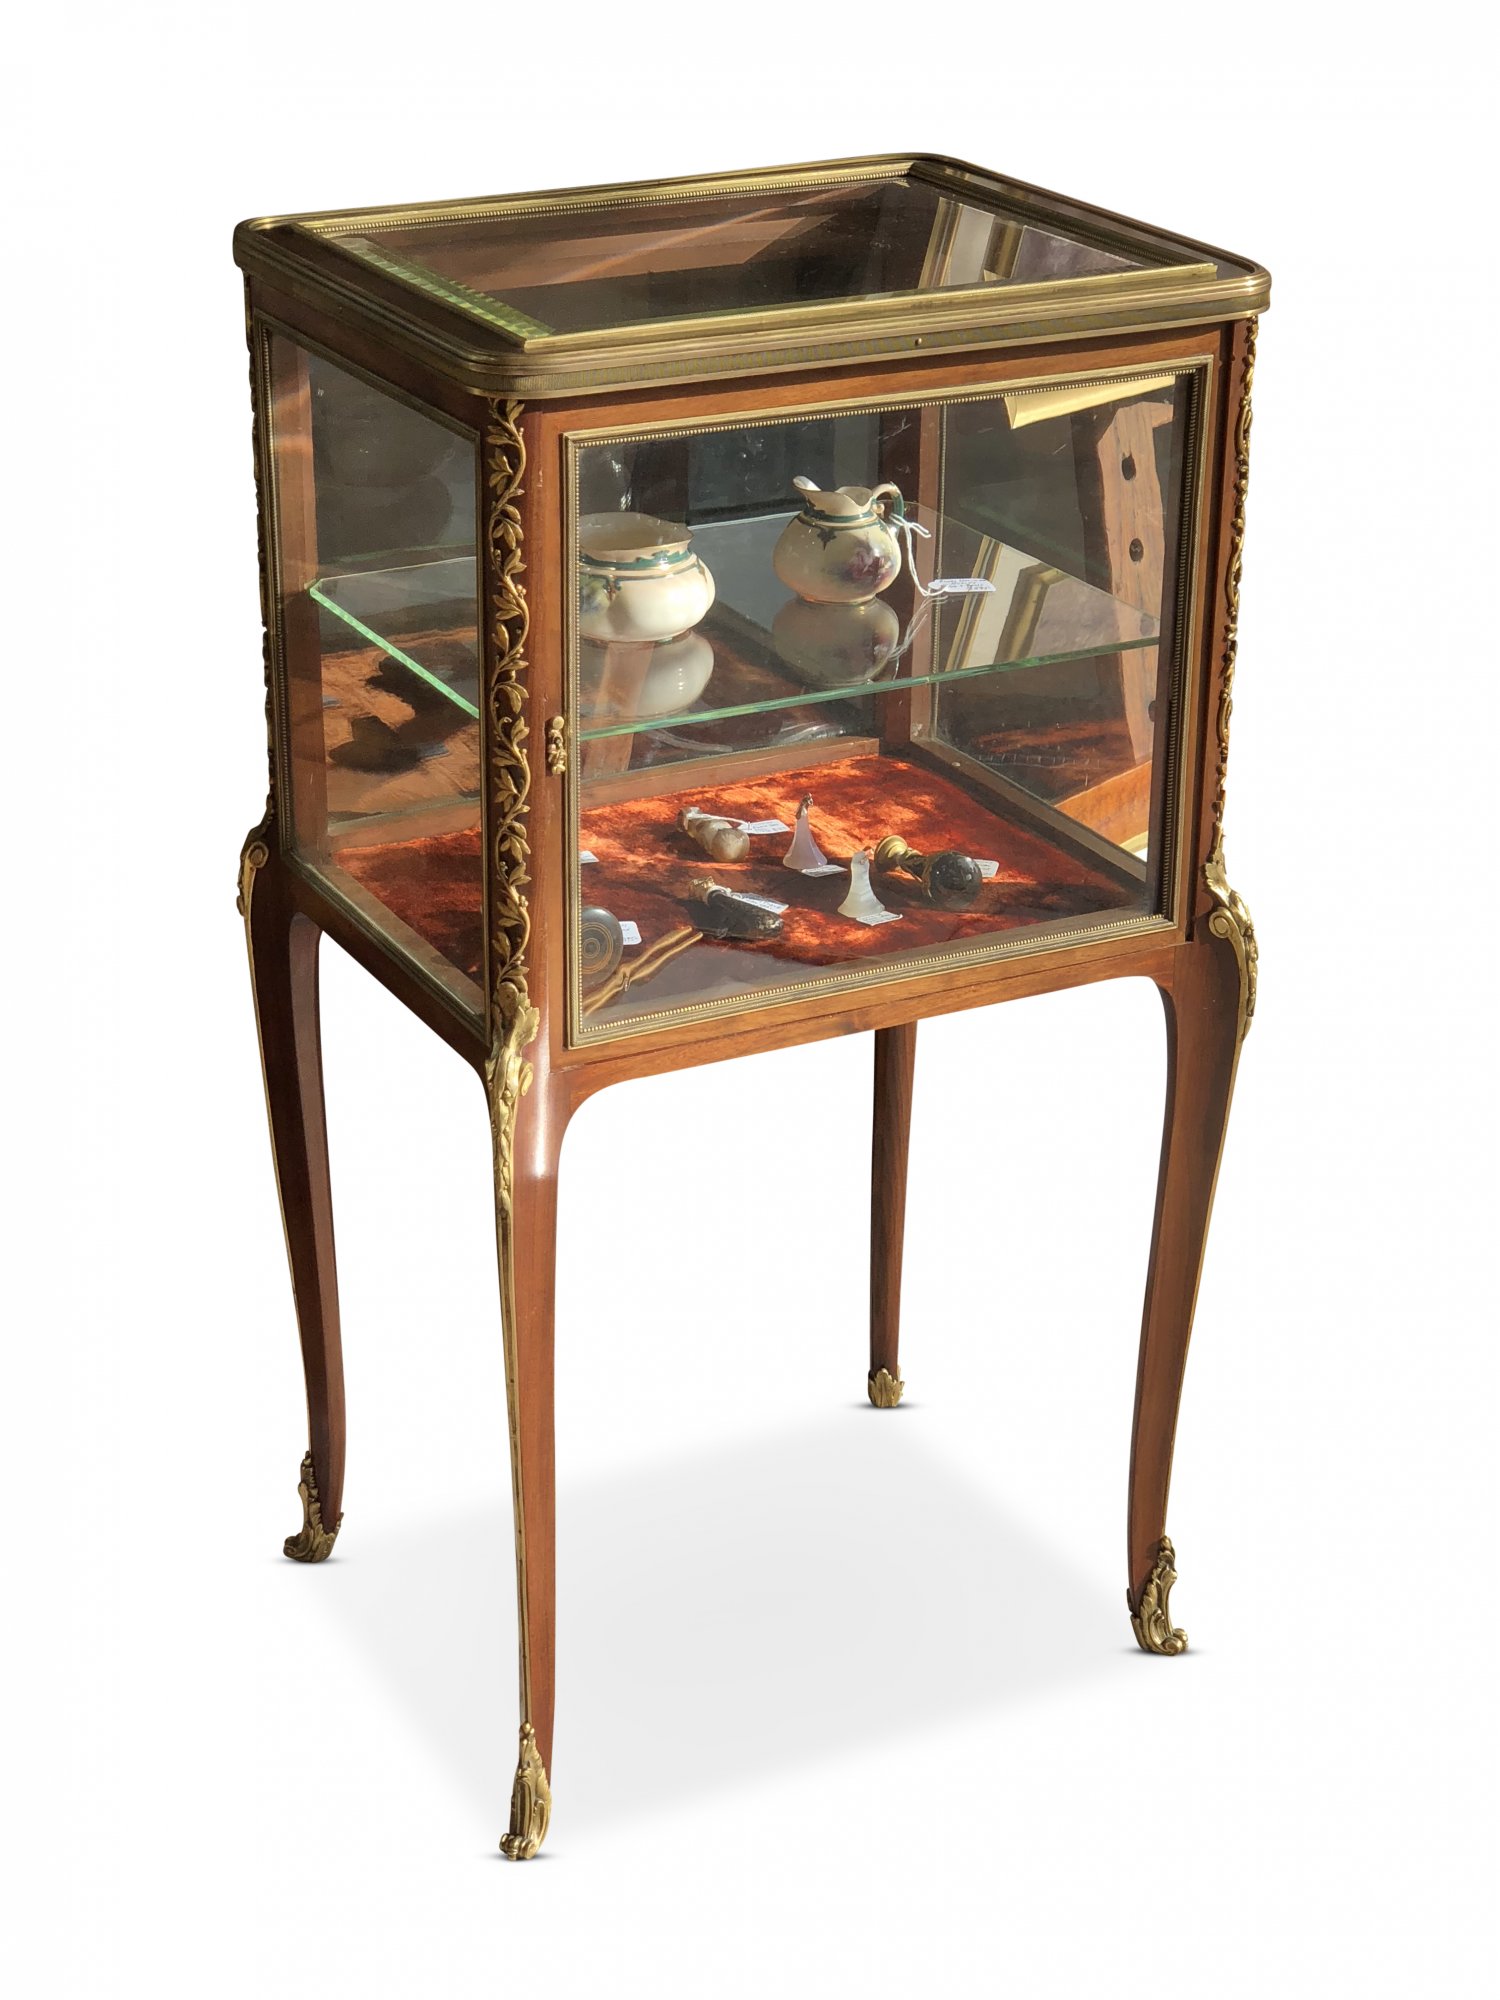 19th Century French Louis XVth-Style Walnut Centre Display Cabinet with Ormolu Mounts